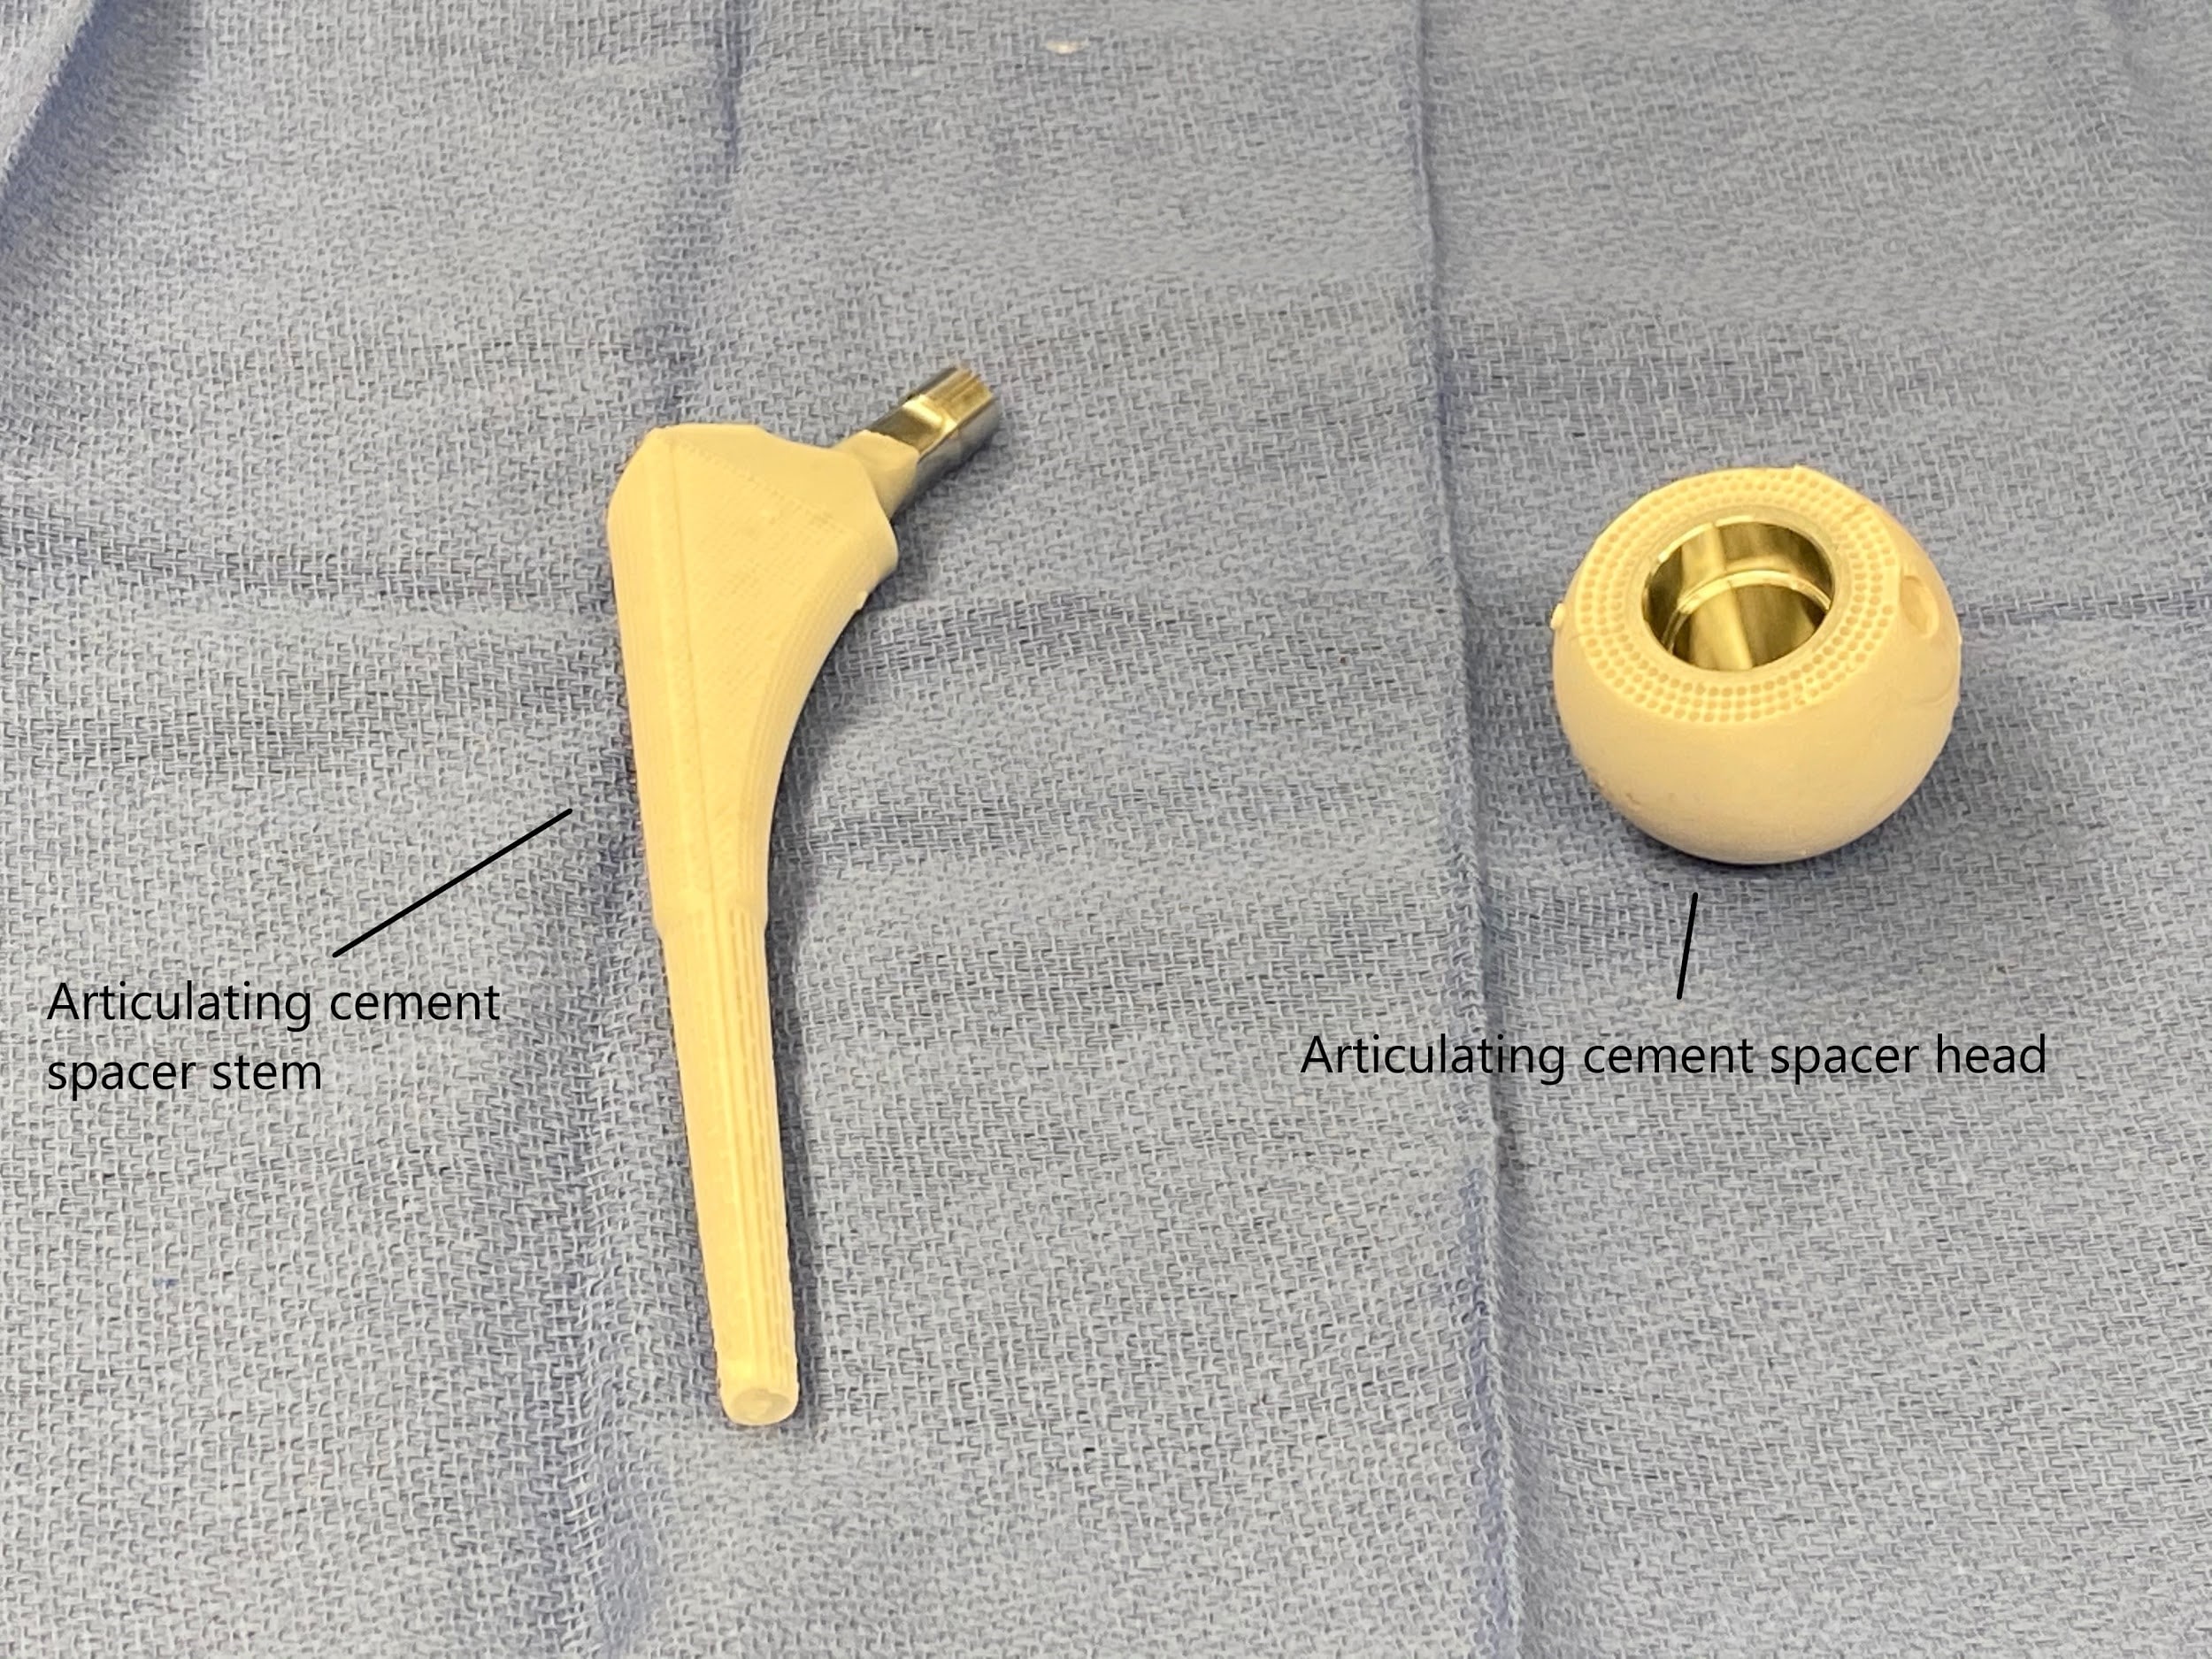 Articulating cement spacer head and stem before implantation